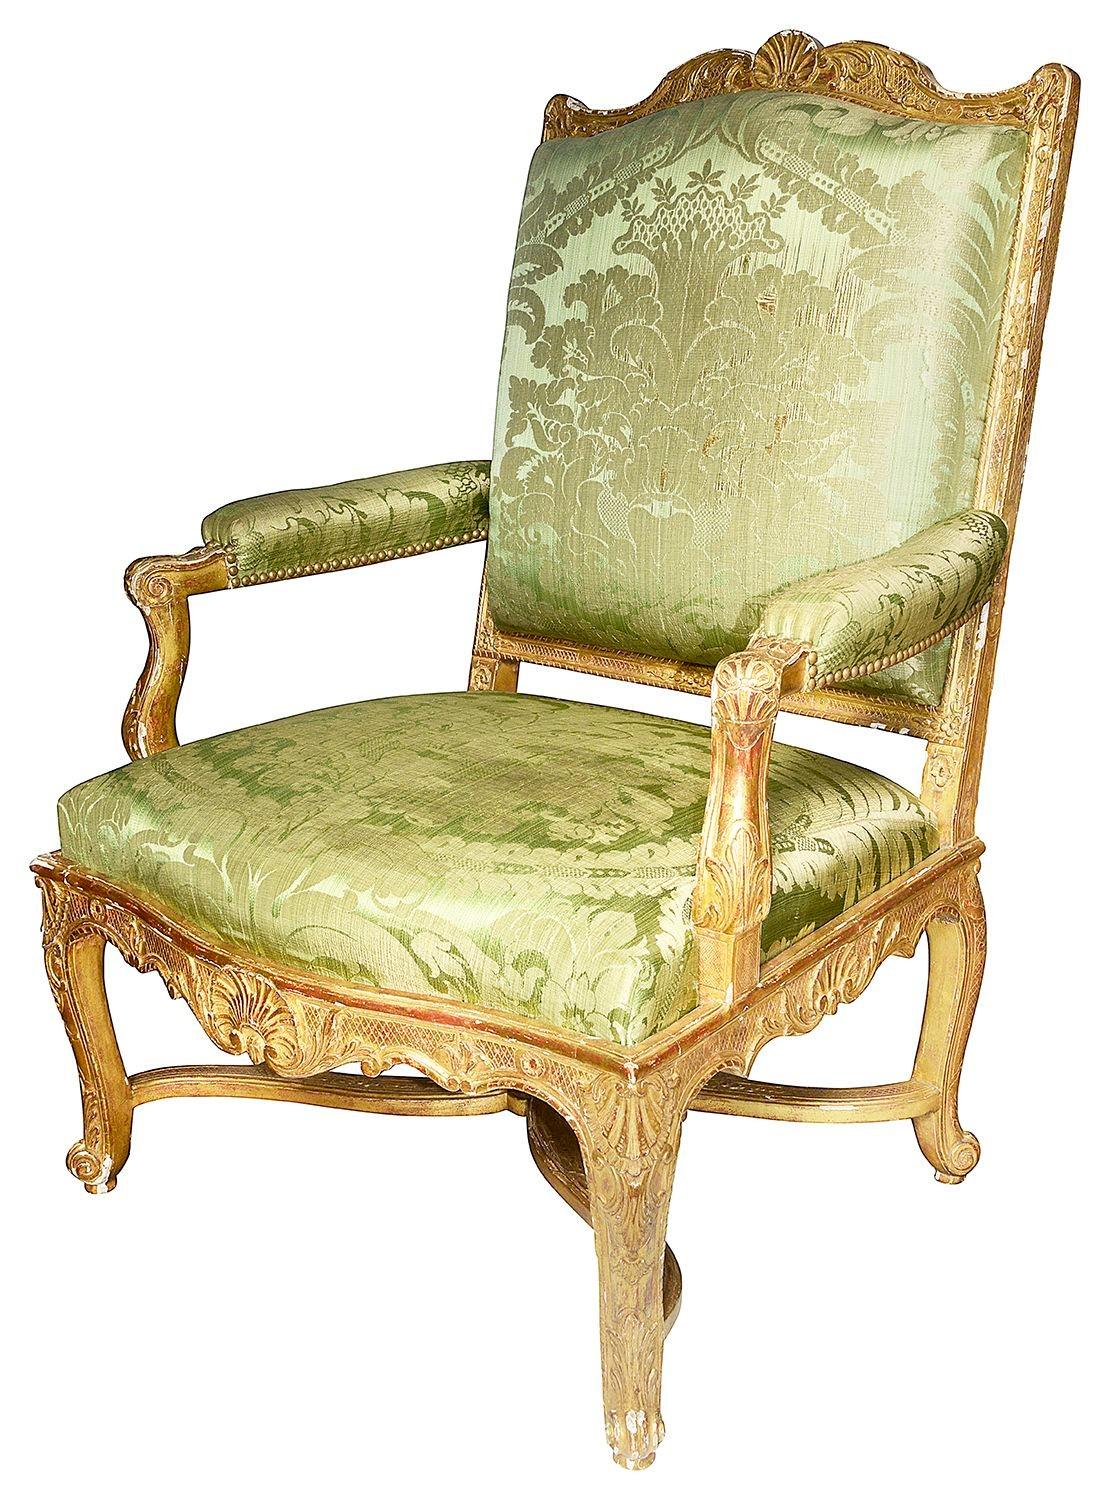 A fine quality pair of late 19th century carved gild wood Salon arm chairs in the Louis XVI style, having classical shell and scrolling decoration, raised on elegant cabriole legs, united by an X stretcher.


Batch 69